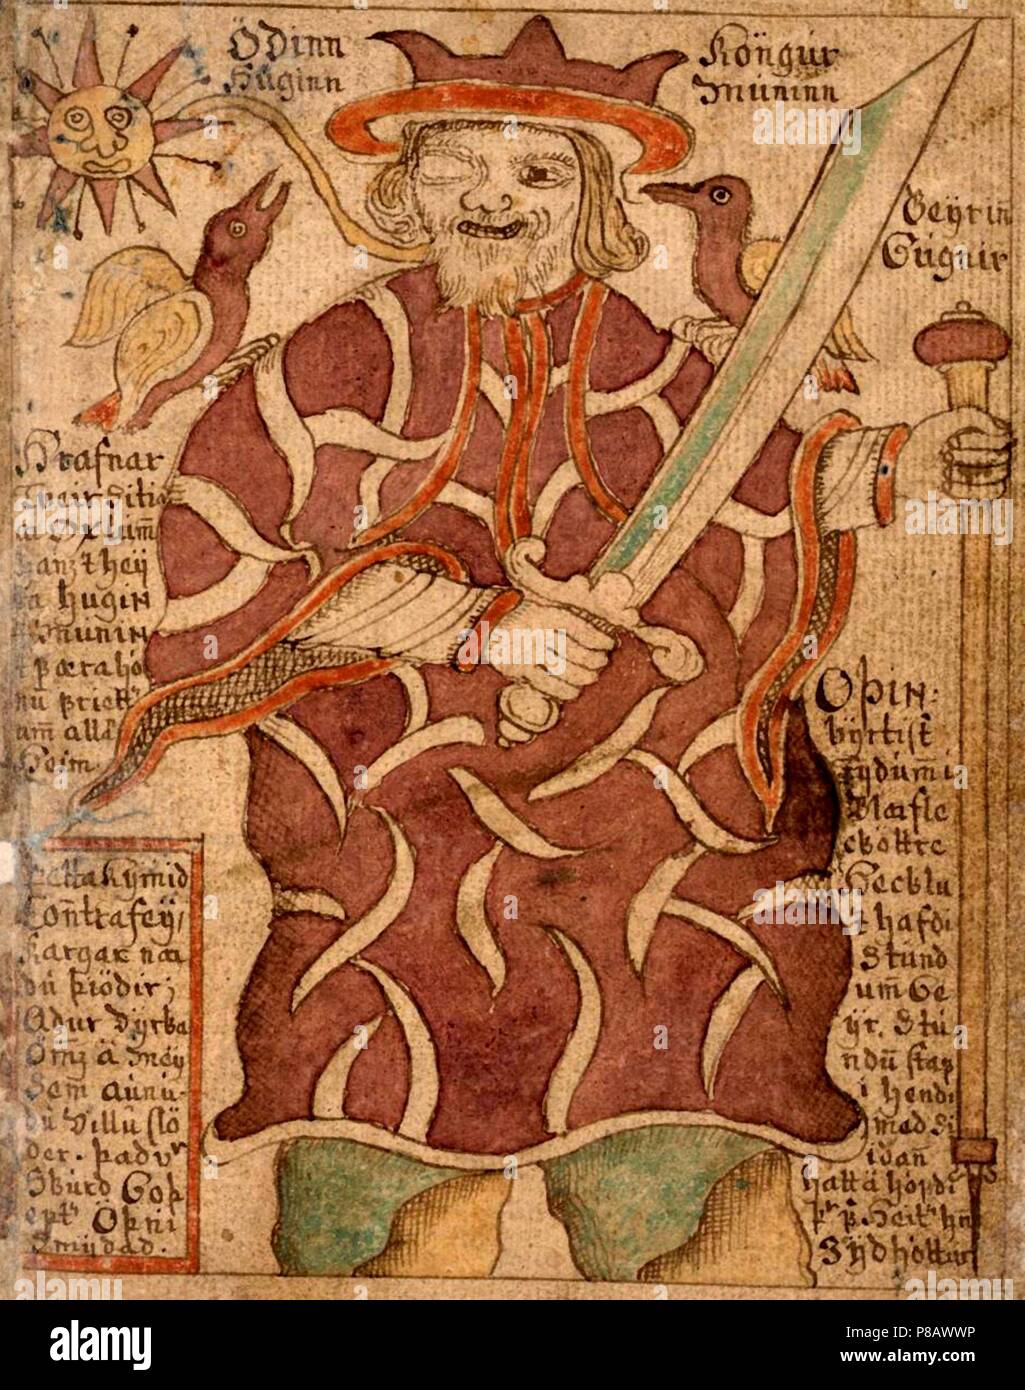 Odin with his ravens Hugin and Munin and his weapons (from the Icelandic Manuscript SÁM 66). Museum: Arni Magnusson Institute, Reykjavik. Stock Photo